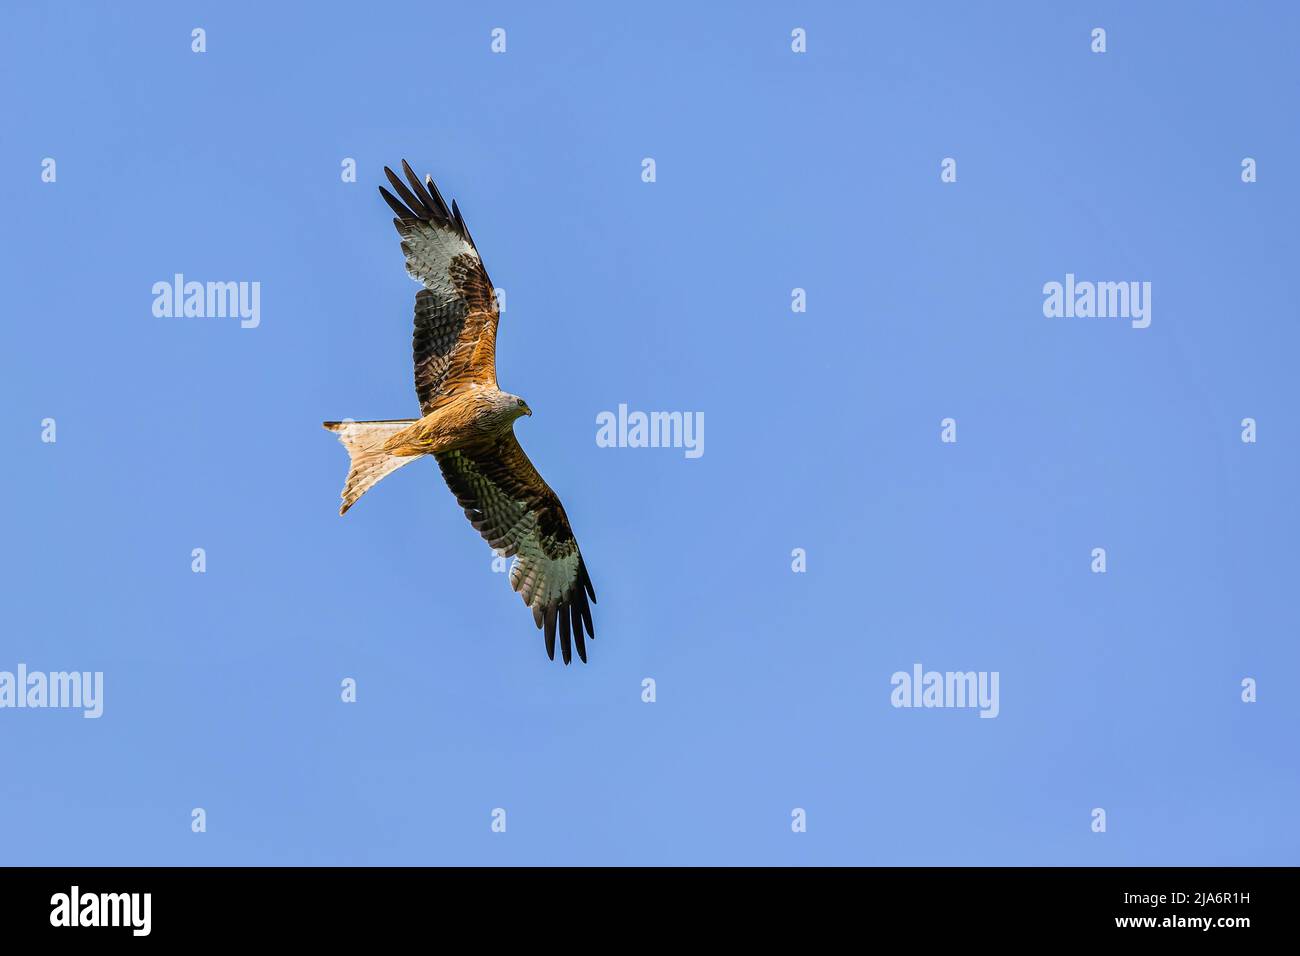 The red kite, a raptor with grey head and brownish body, flying over blue sky on a sunny spring day. Stock Photo